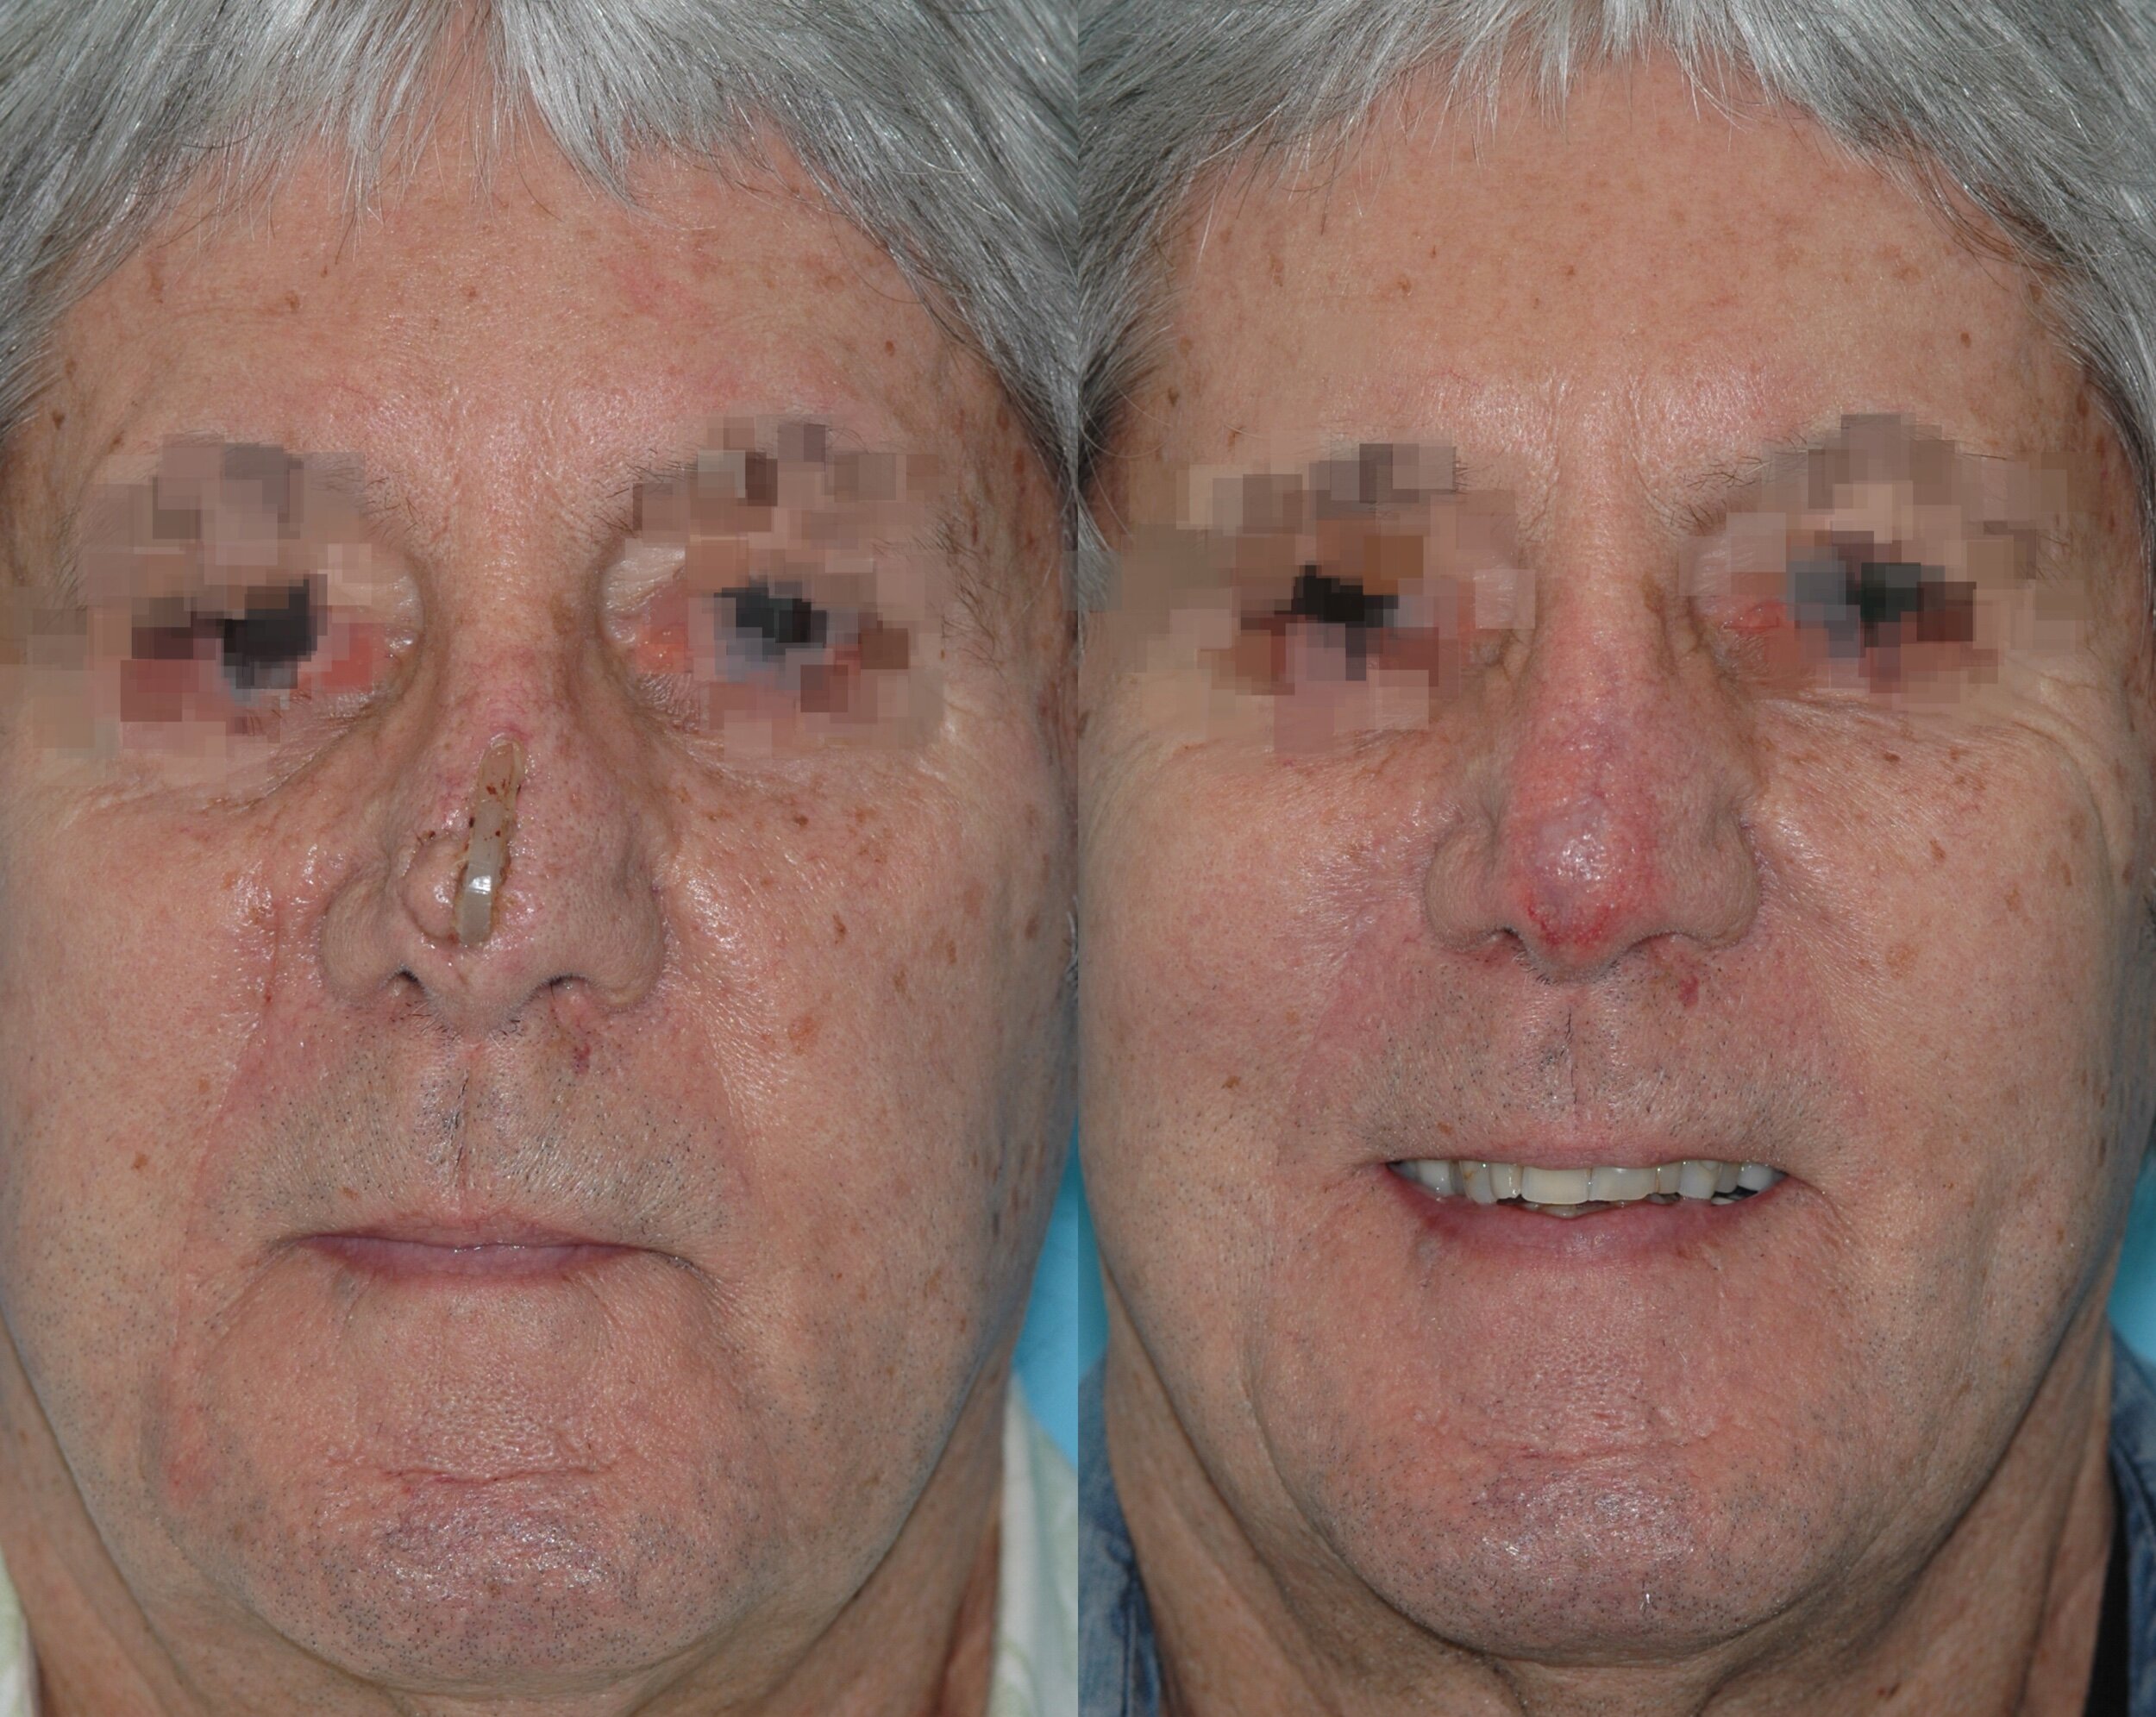  Extruding implant removal and nasal reconstruction  